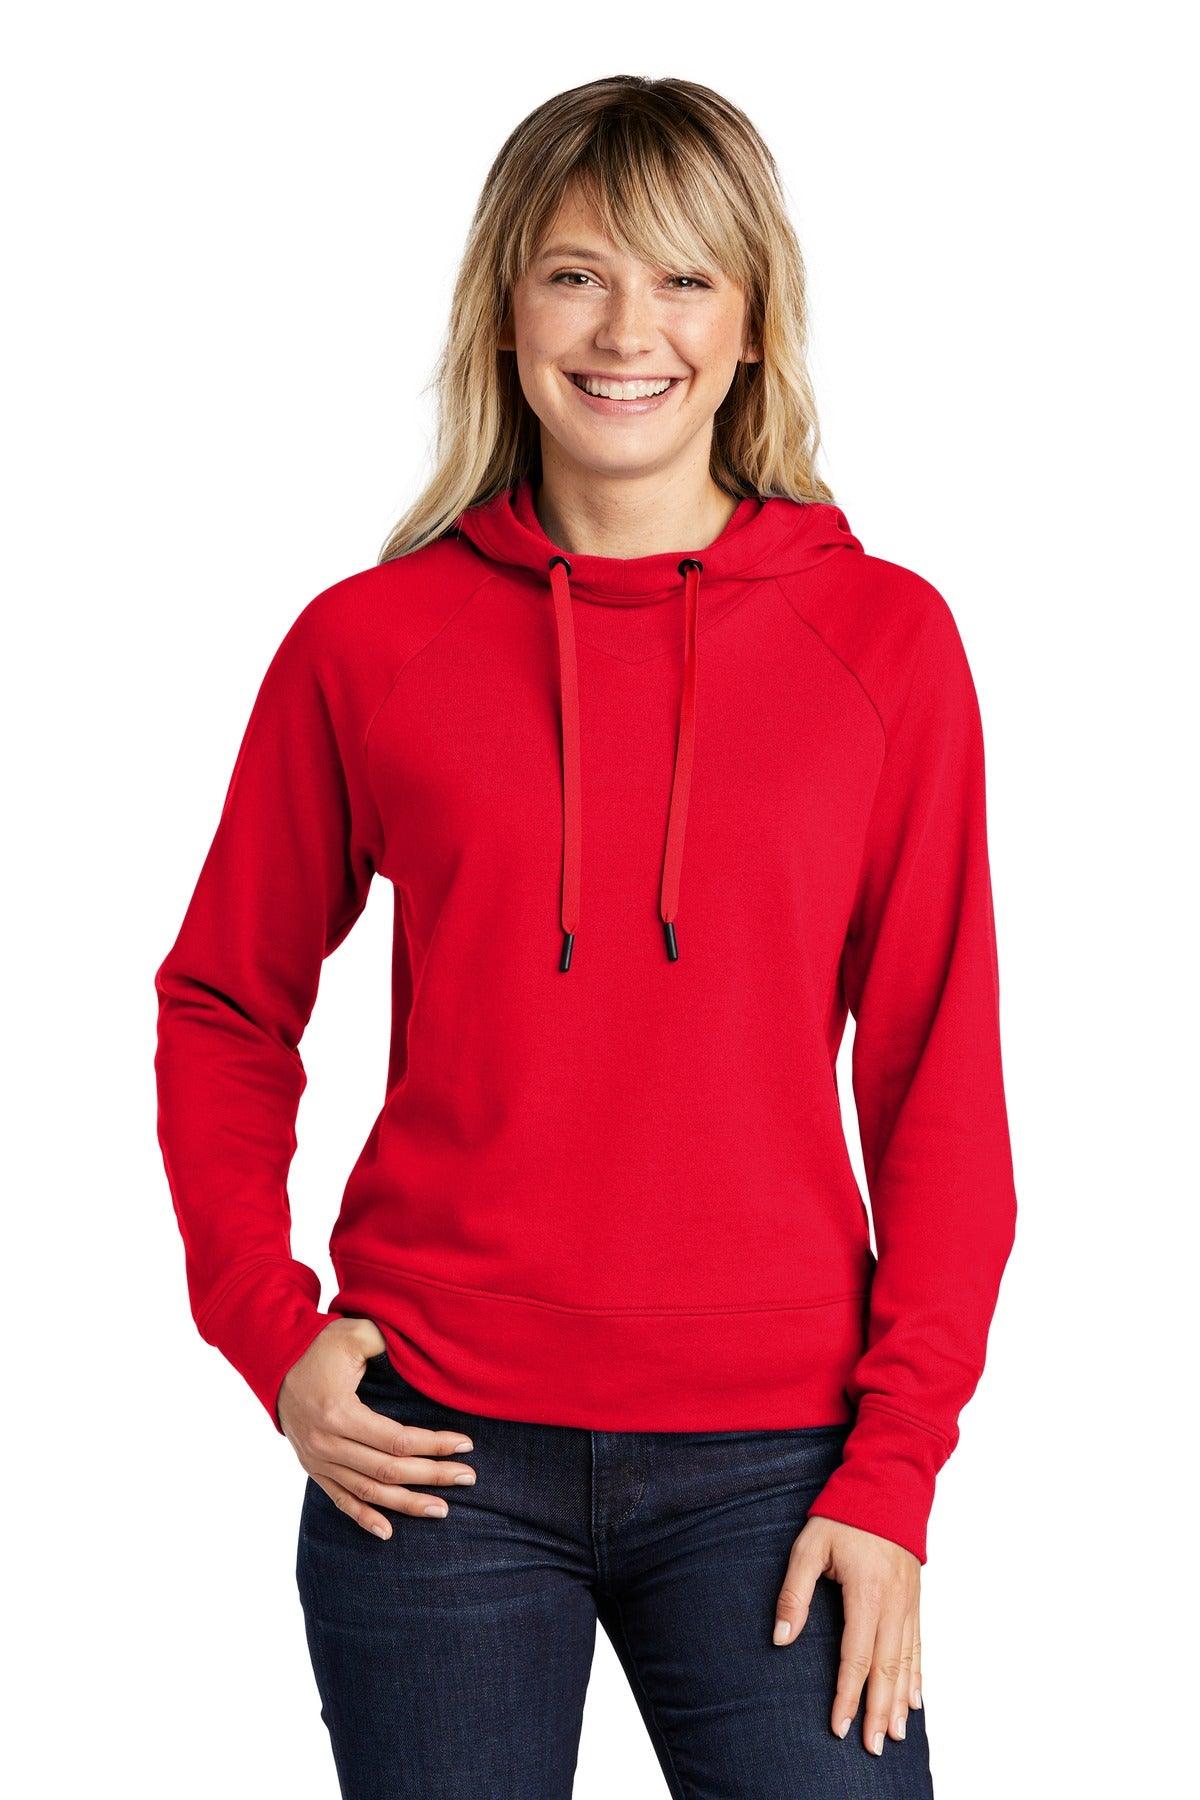 Sport-Tek Ladies Lightweight French Terry Pullover Hoodie. LST272 - Dresses Max